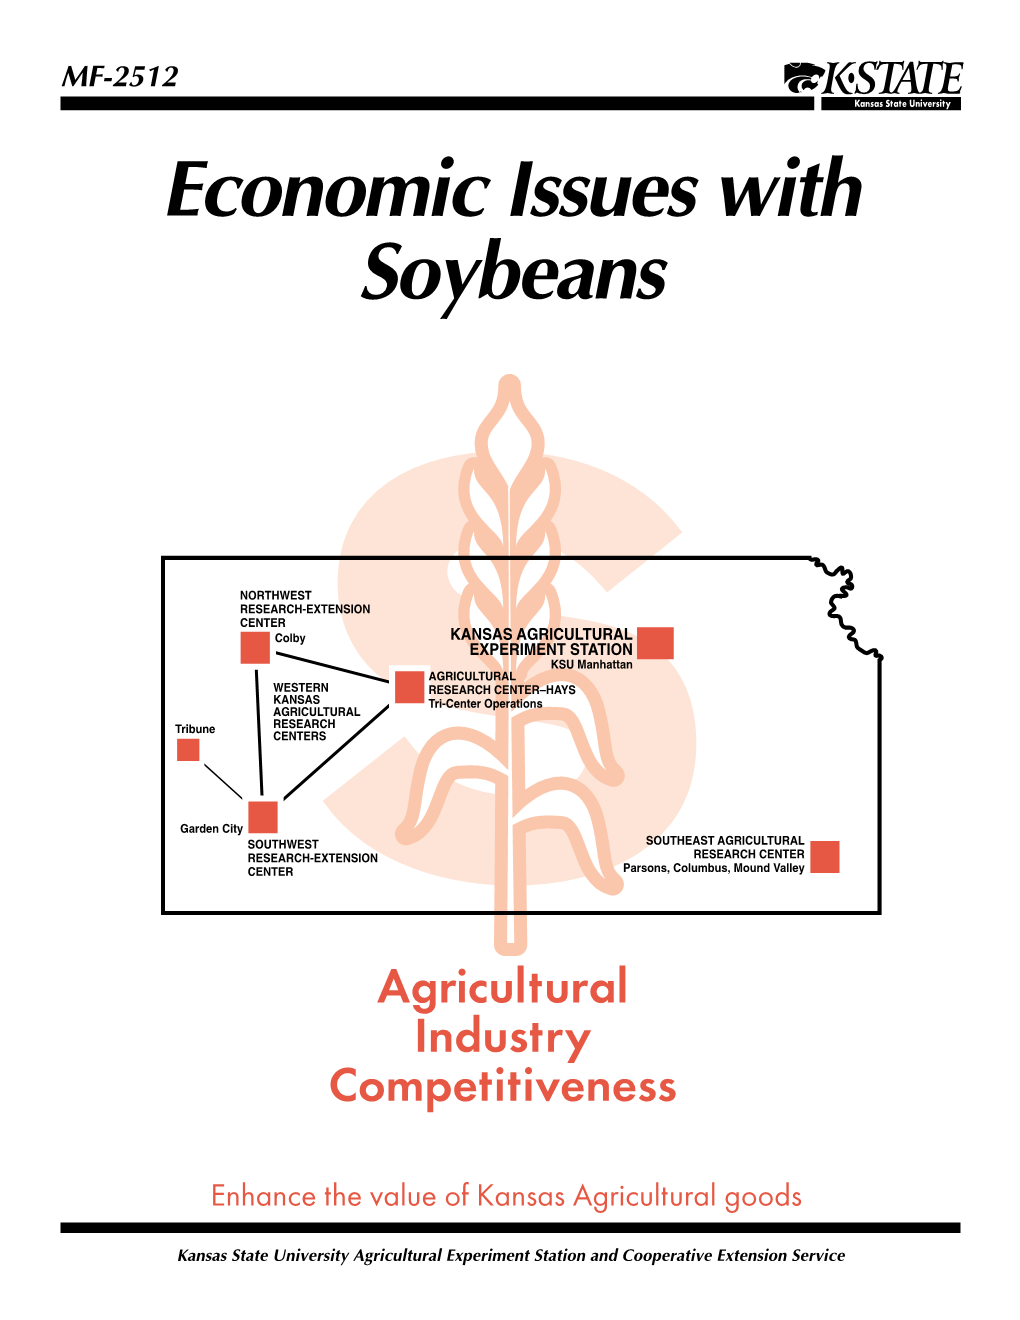 MF2512 Economic Issues with Soybeans